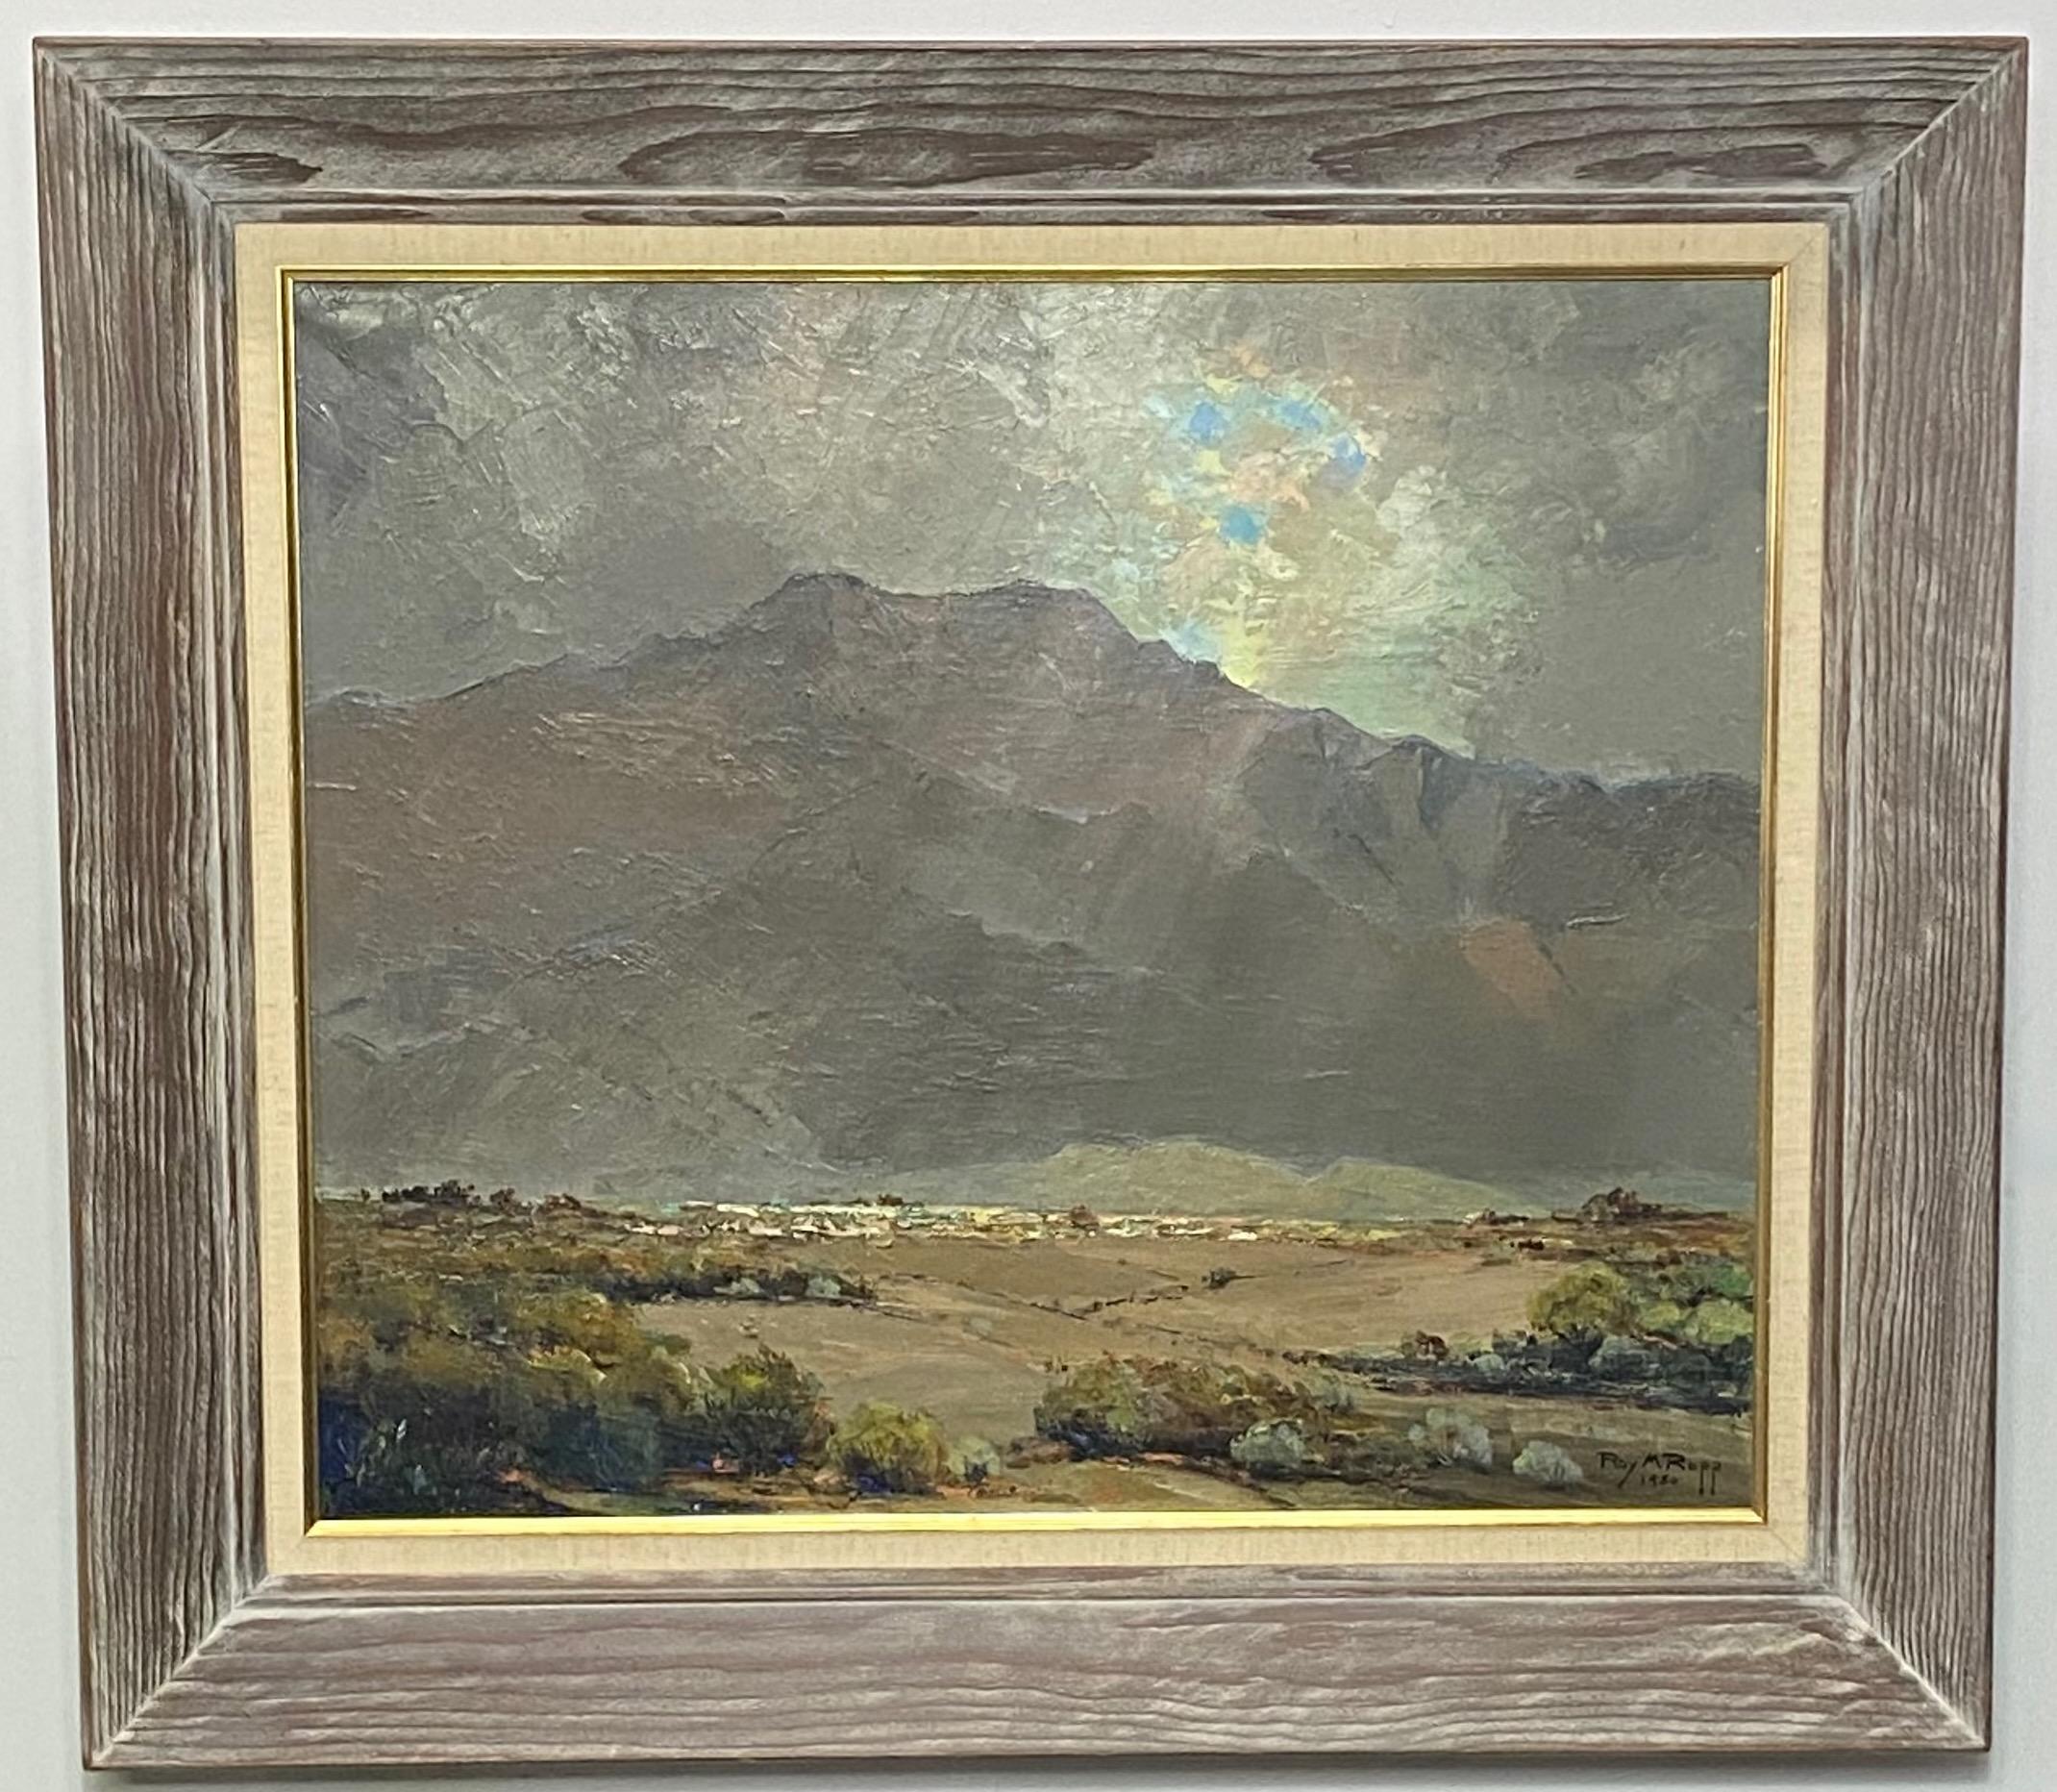 Hand-Painted Palm Springs Mountain Dessert Landscape Painting by Roy Ropp Dated 1951